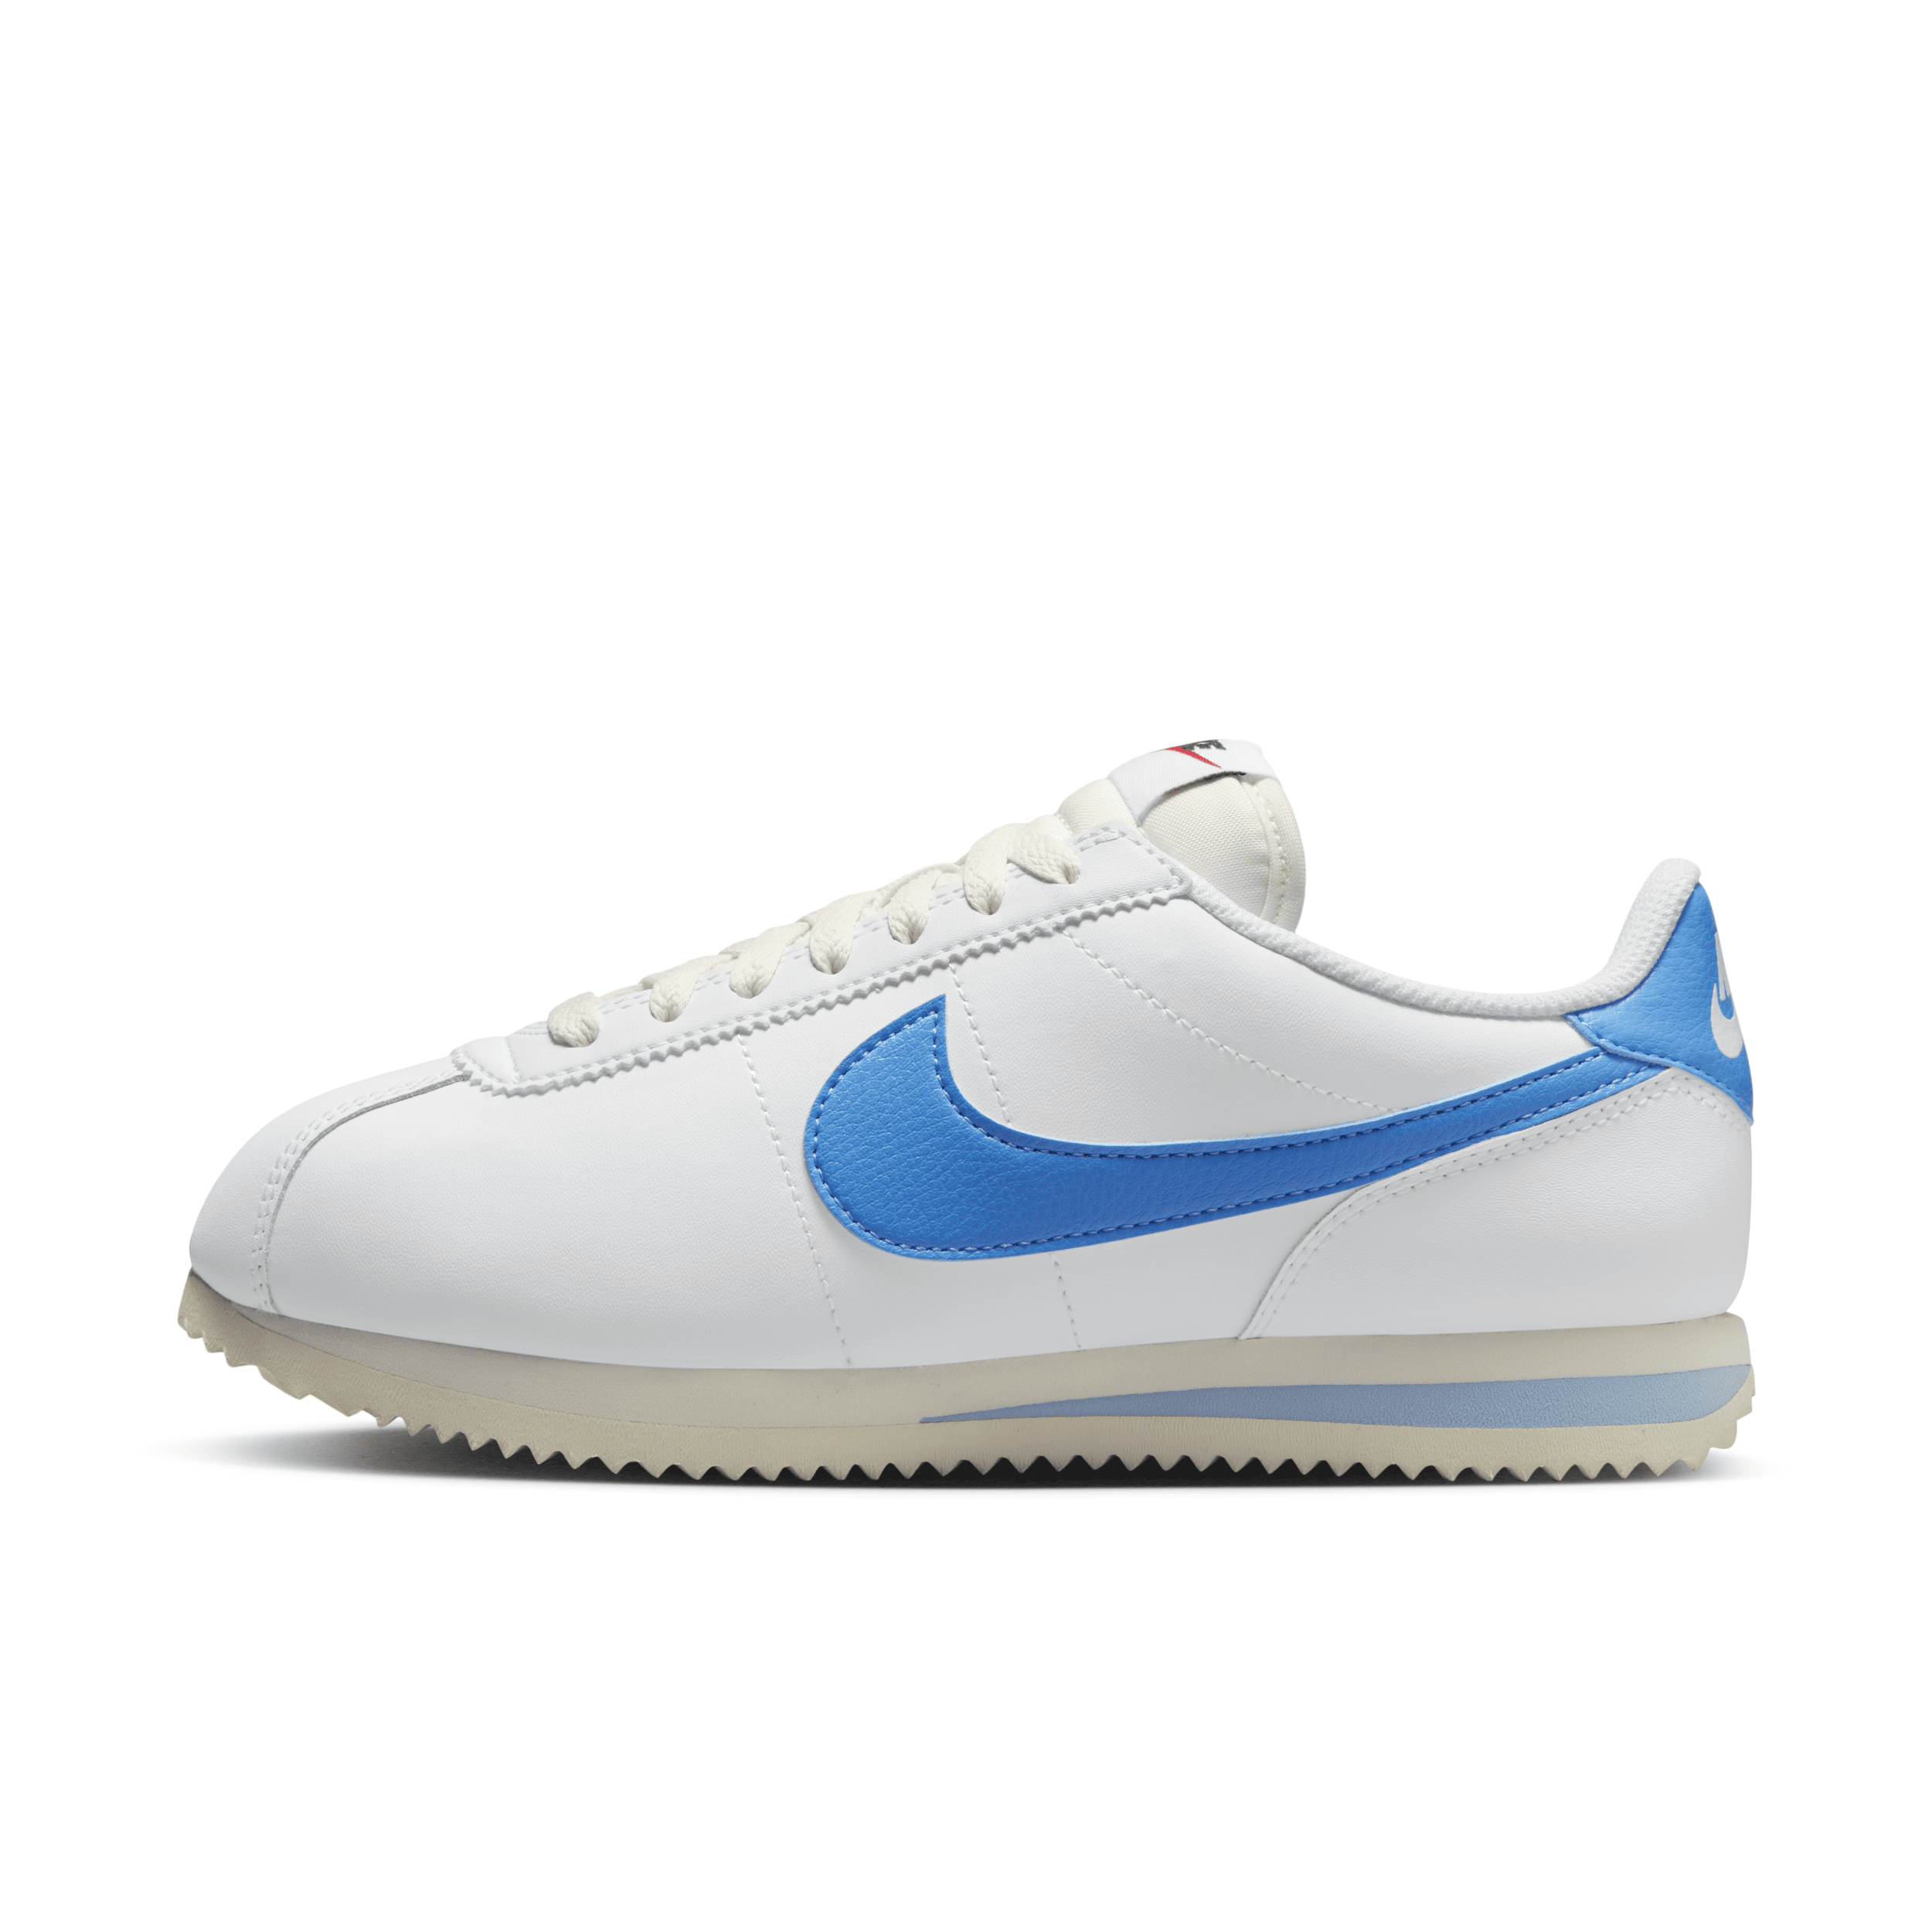 Nike Women's Cortez Leather Shoes In White